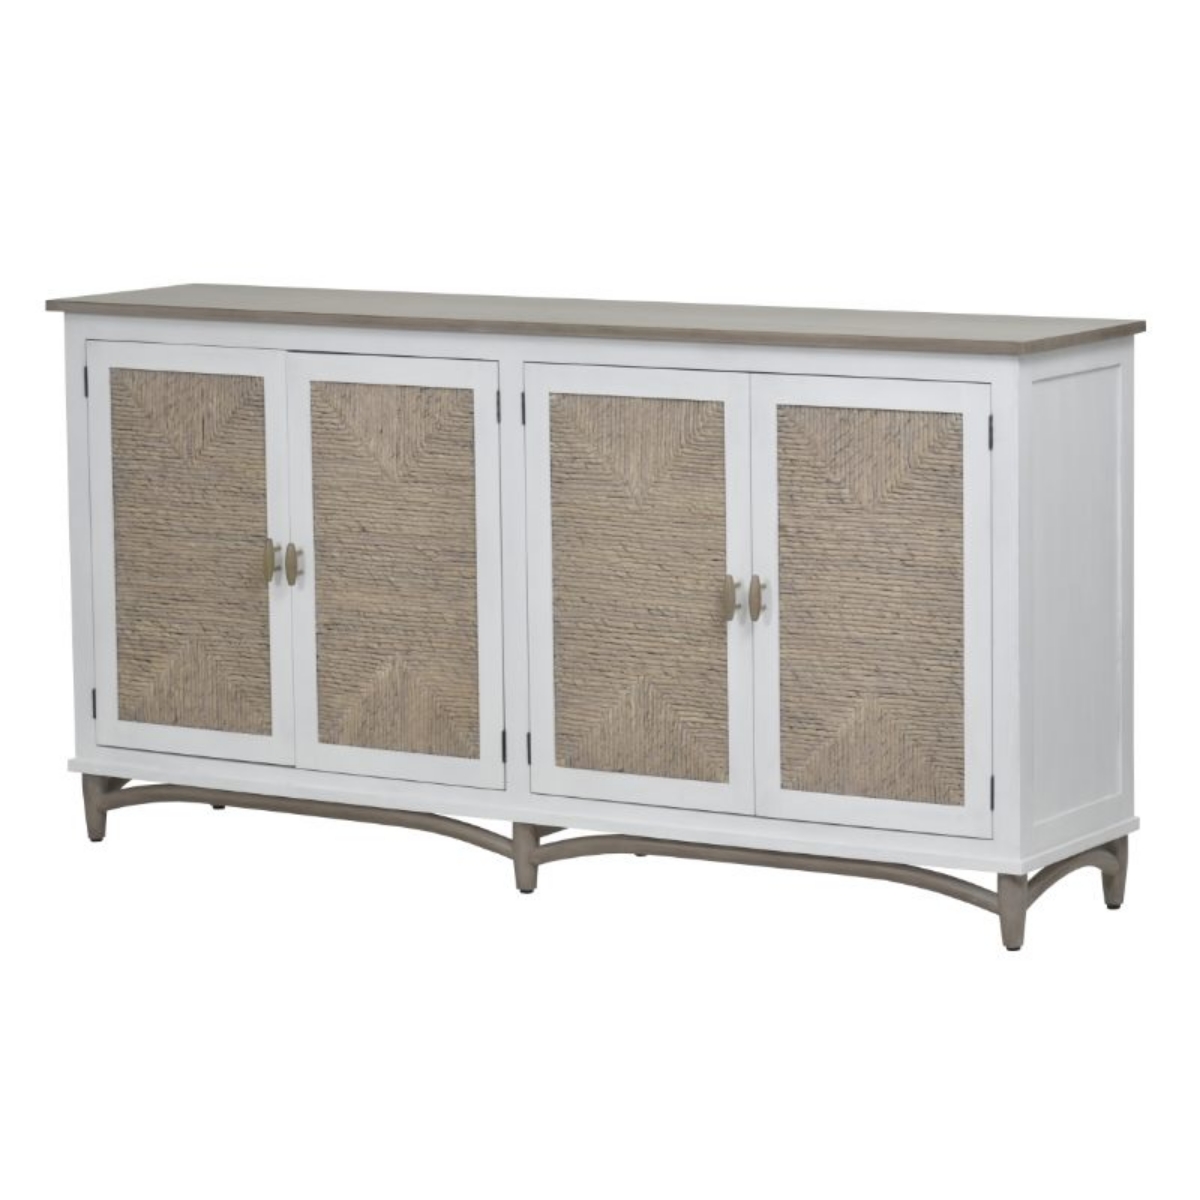 Picture of PORT ROYAL 4 DR CREDENZA